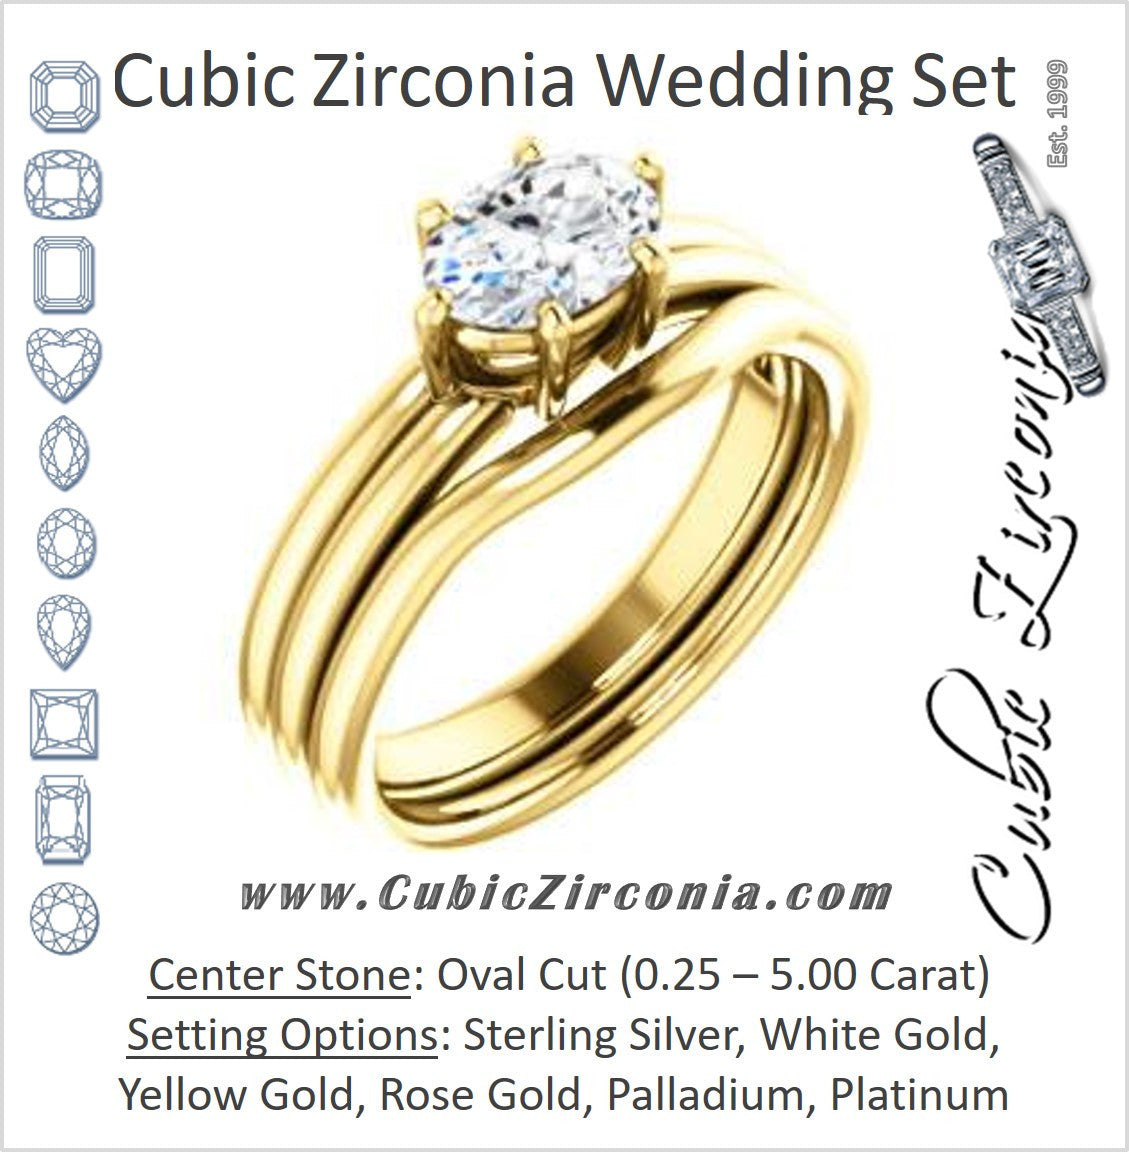 CZ Wedding Set, featuring The Marnie engagement ring (Customizable Oval Cut Solitaire with Grooved Band)